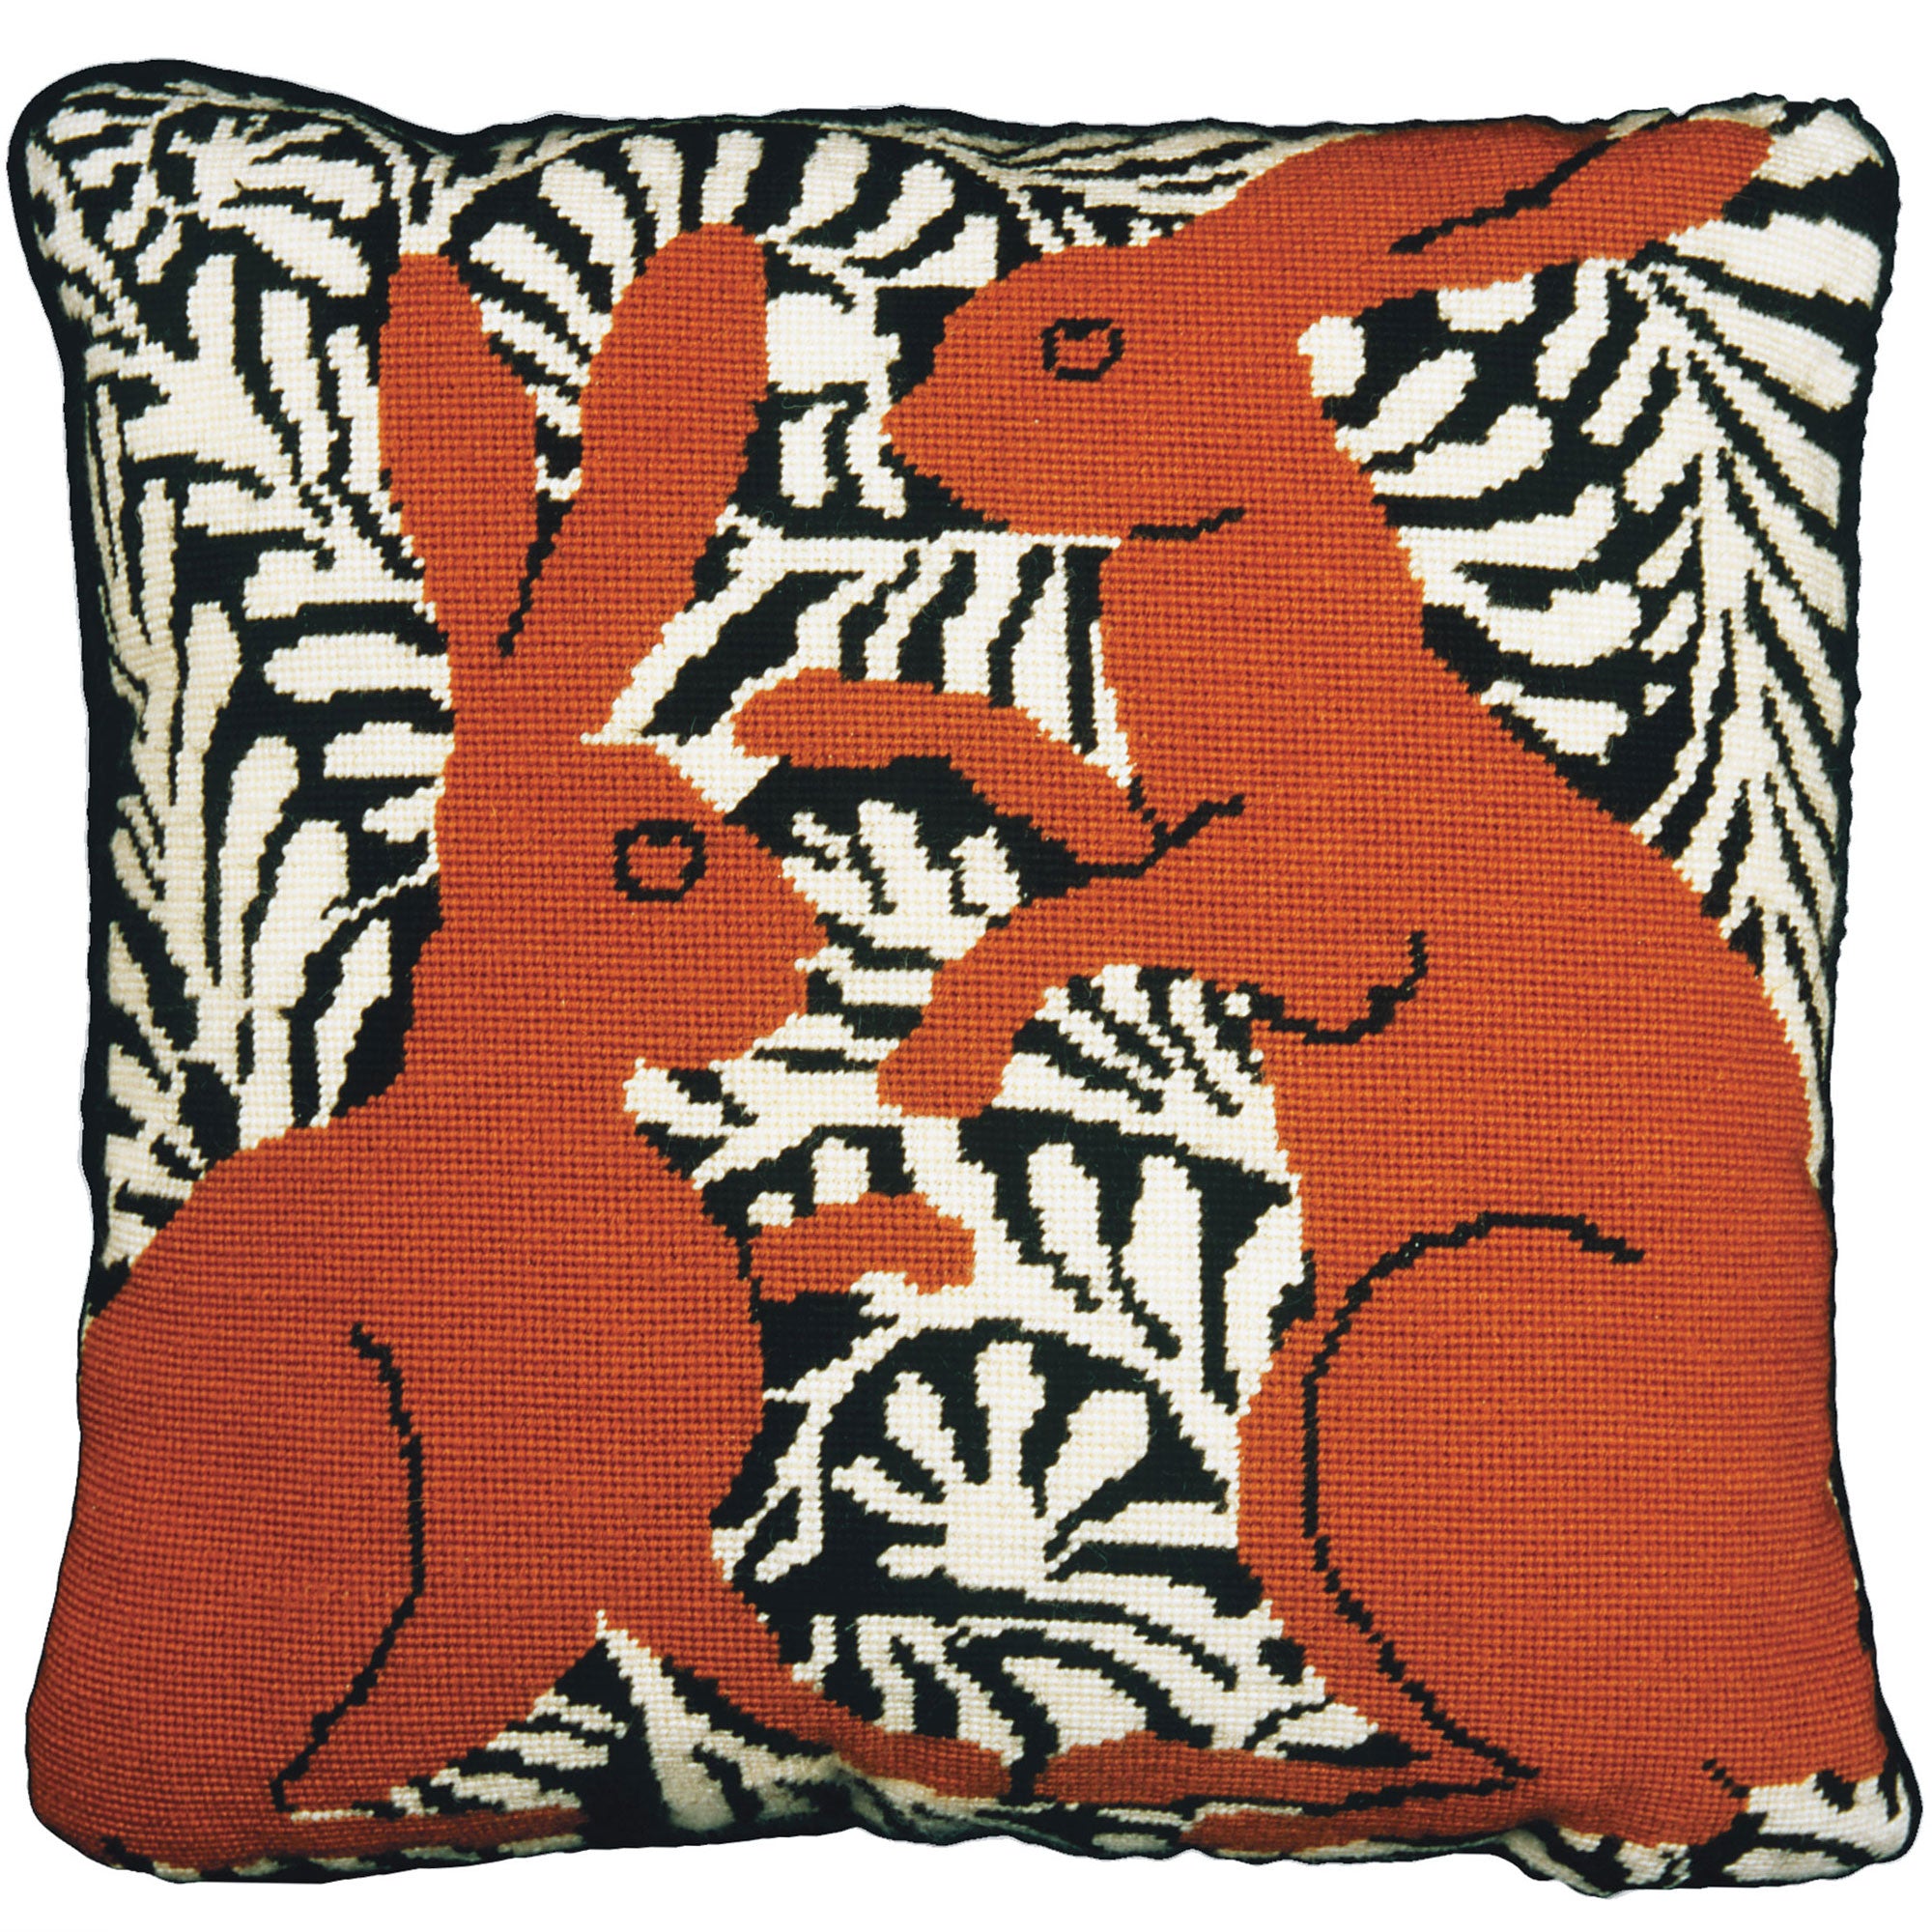 Fine Cell Work De Morgan Boxing Hares Needlepoint Cushion Kit Brown